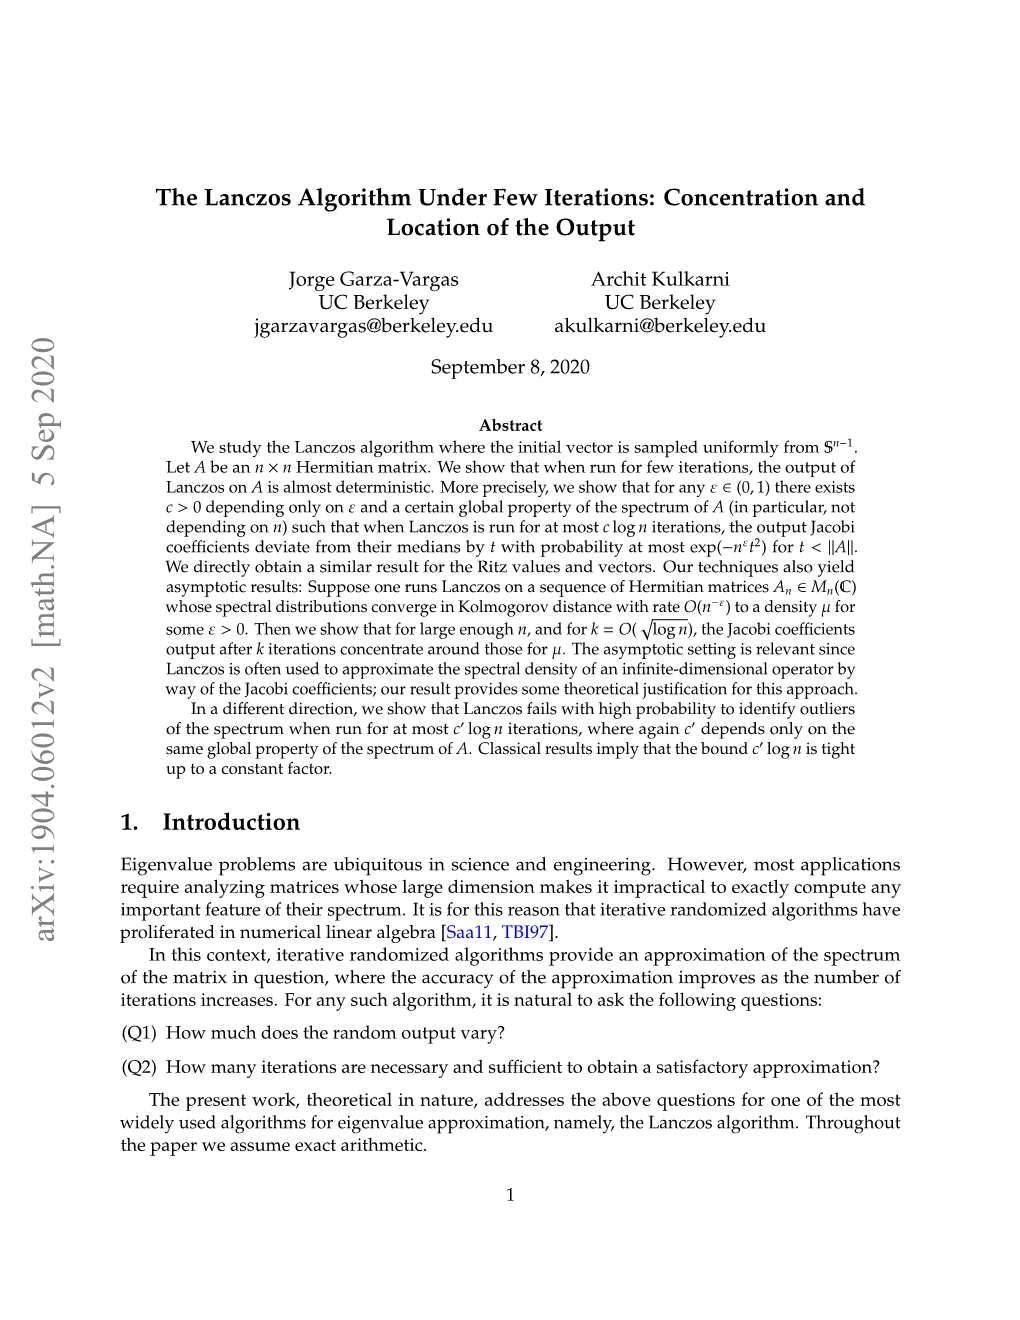 The Lanczos Algorithm Under Few Iterations: Concentration and Location of the Output